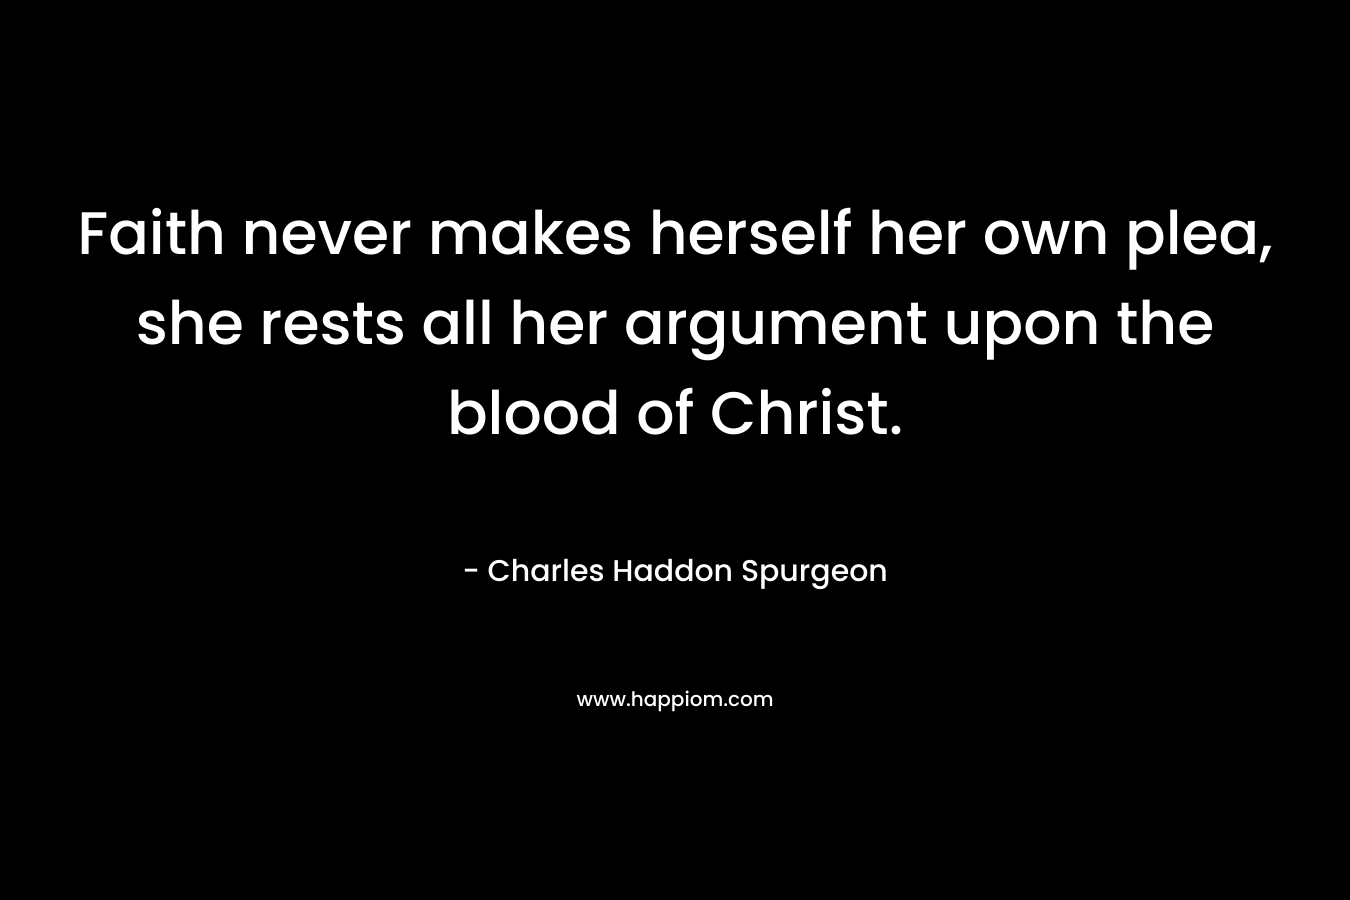 Faith never makes herself her own plea, she rests all her argument upon the blood of Christ. – Charles Haddon Spurgeon